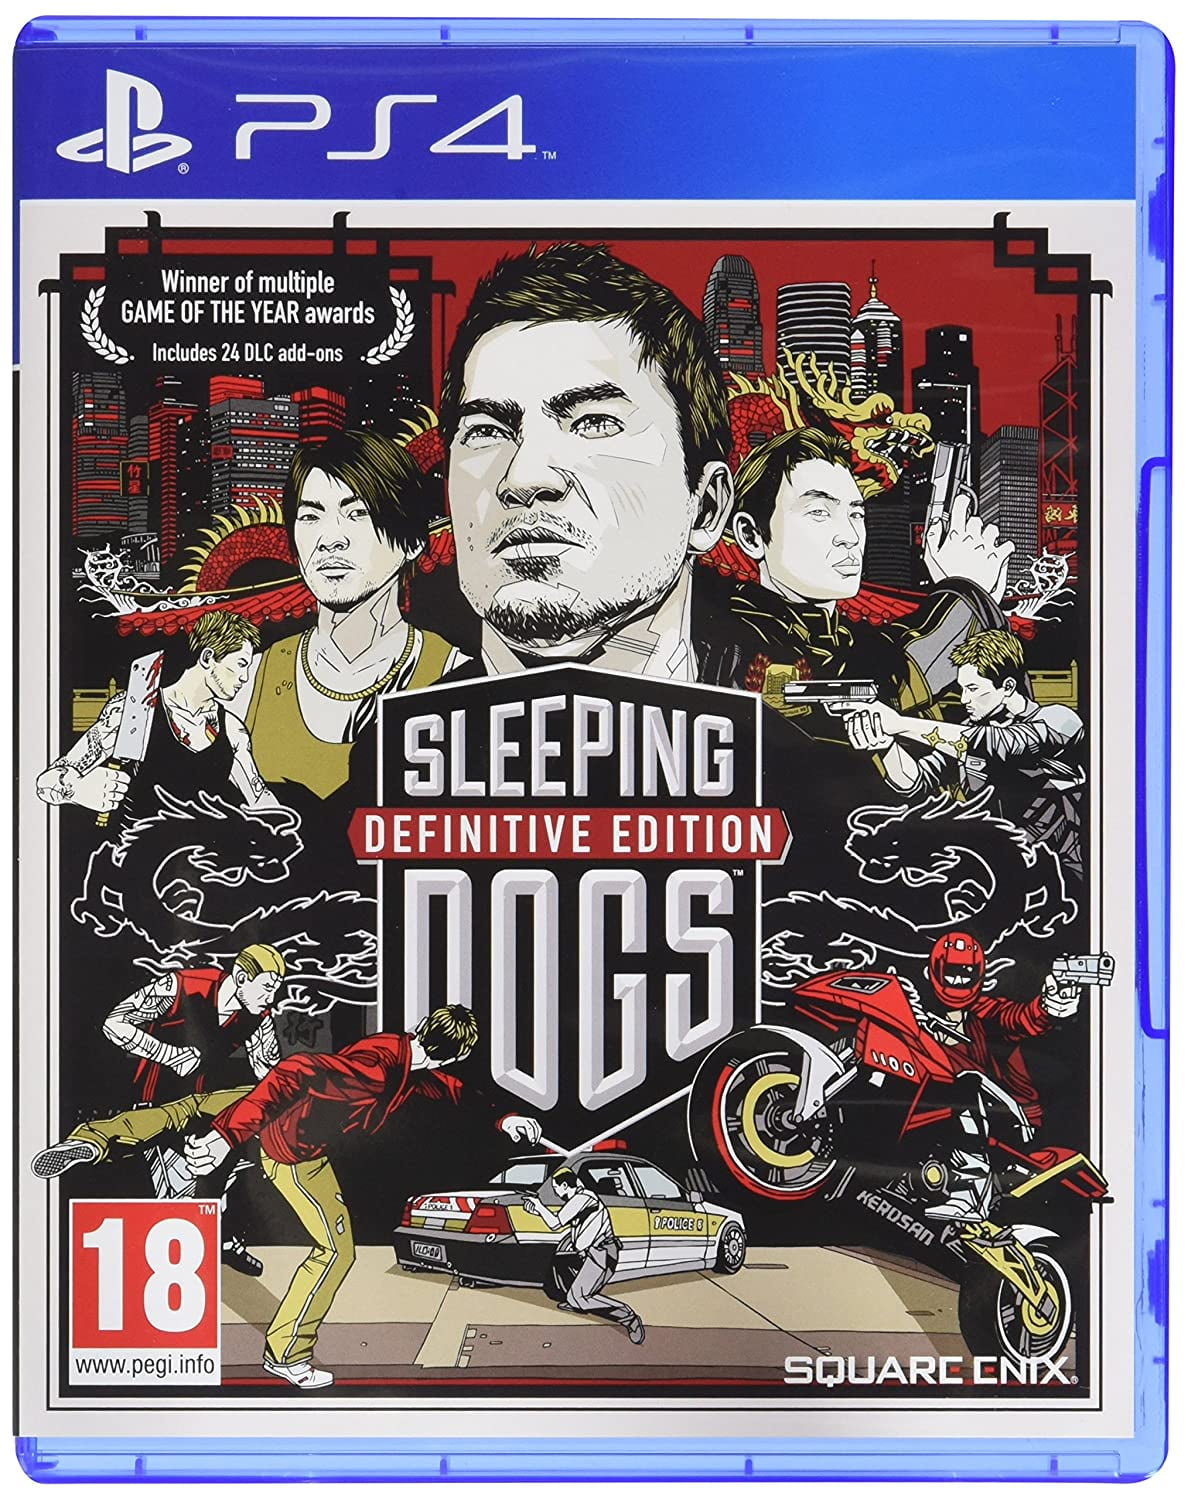 Anybody know why Sleeping Dogs can't be found on the PlayStation